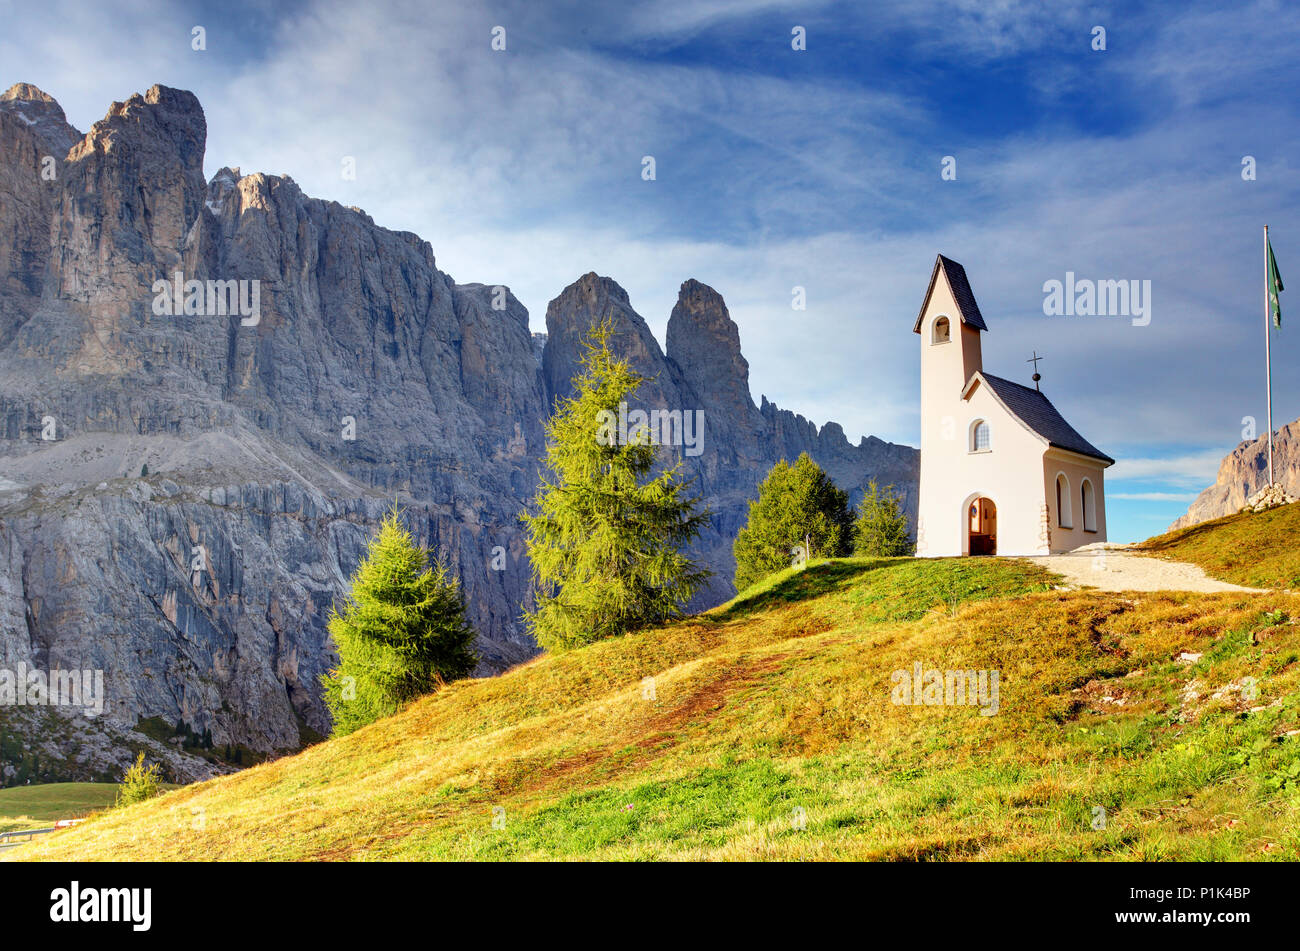 Summer mountain landscape in Alps - italy dolomites Stock Photo